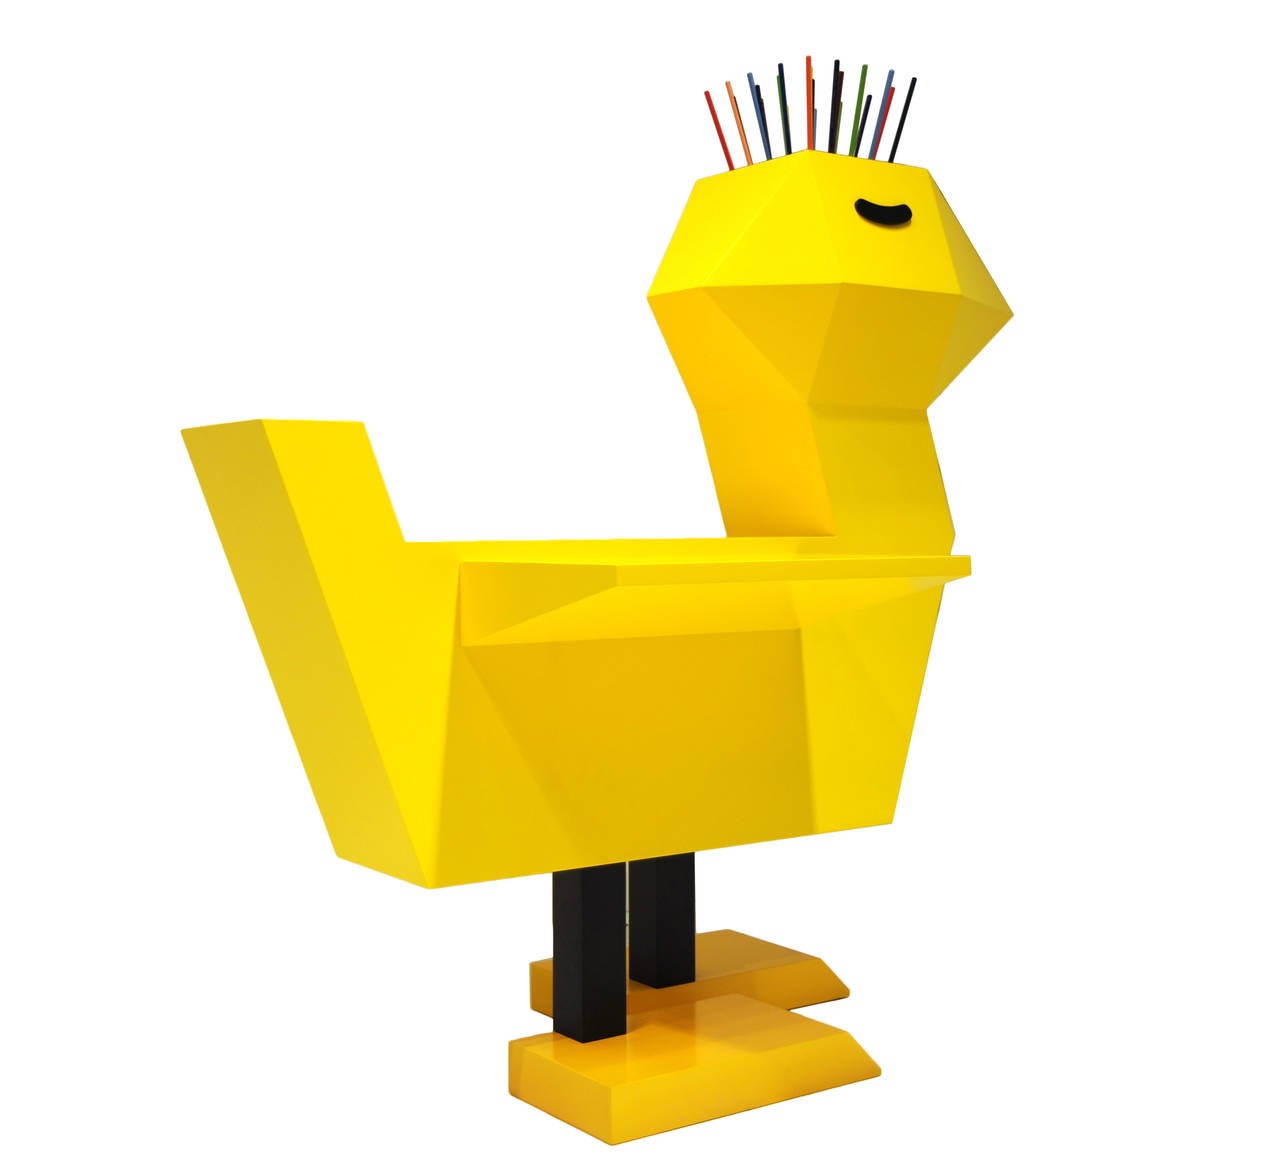 American Limited Edition Yellow Double Wing Chicken Desk by Guillamit For Sale